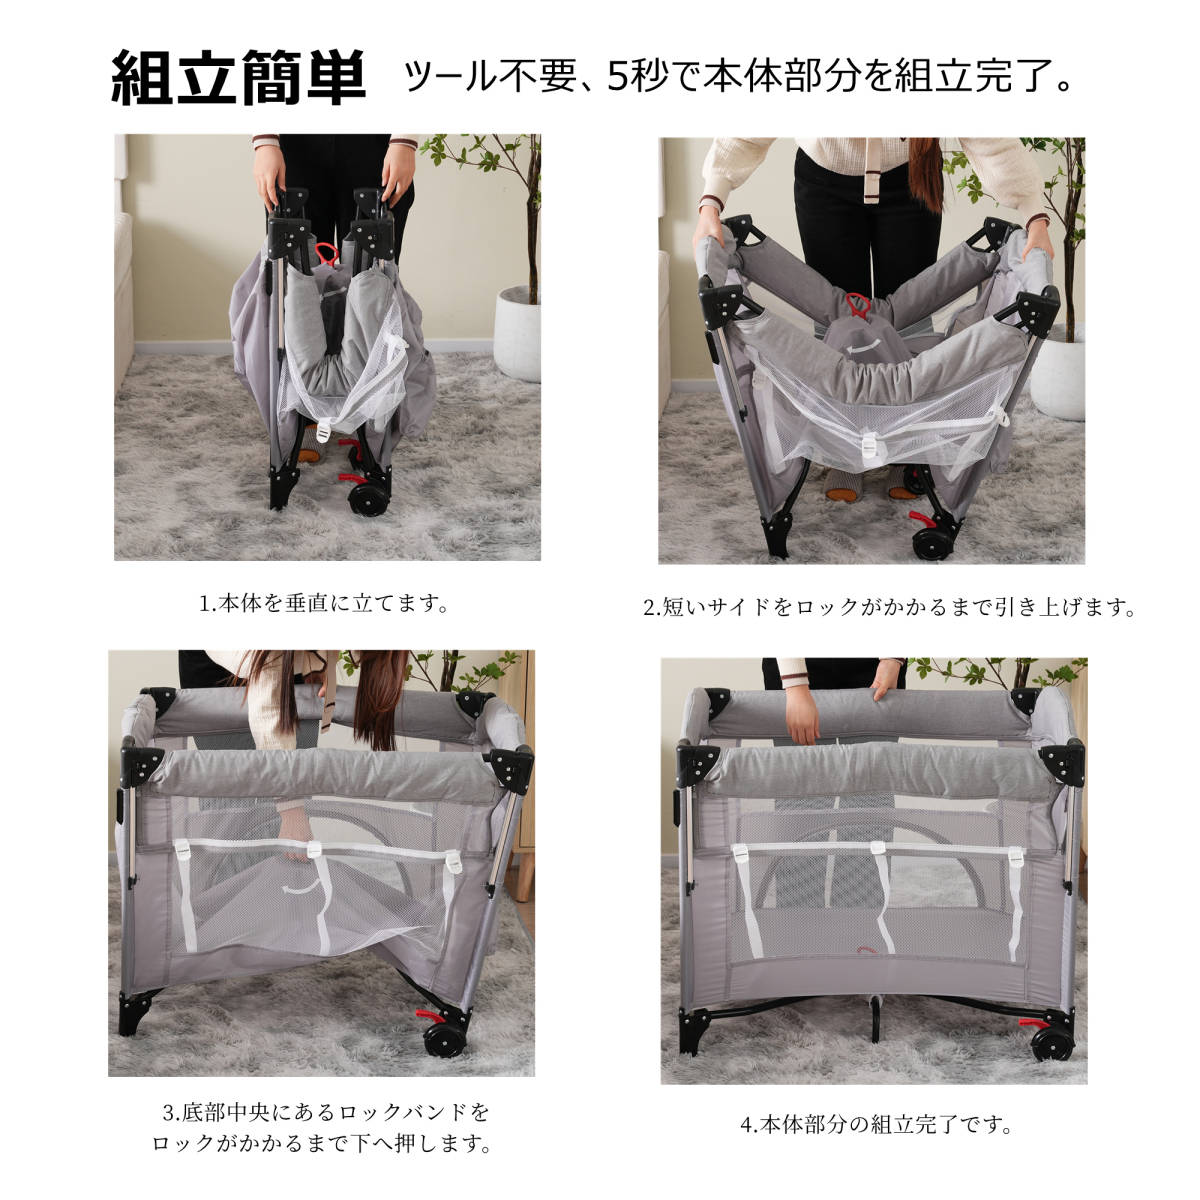  crib playpen folding ... bed diapers change table attaching play yard . daytime . mat carry bag attaching with mattress 